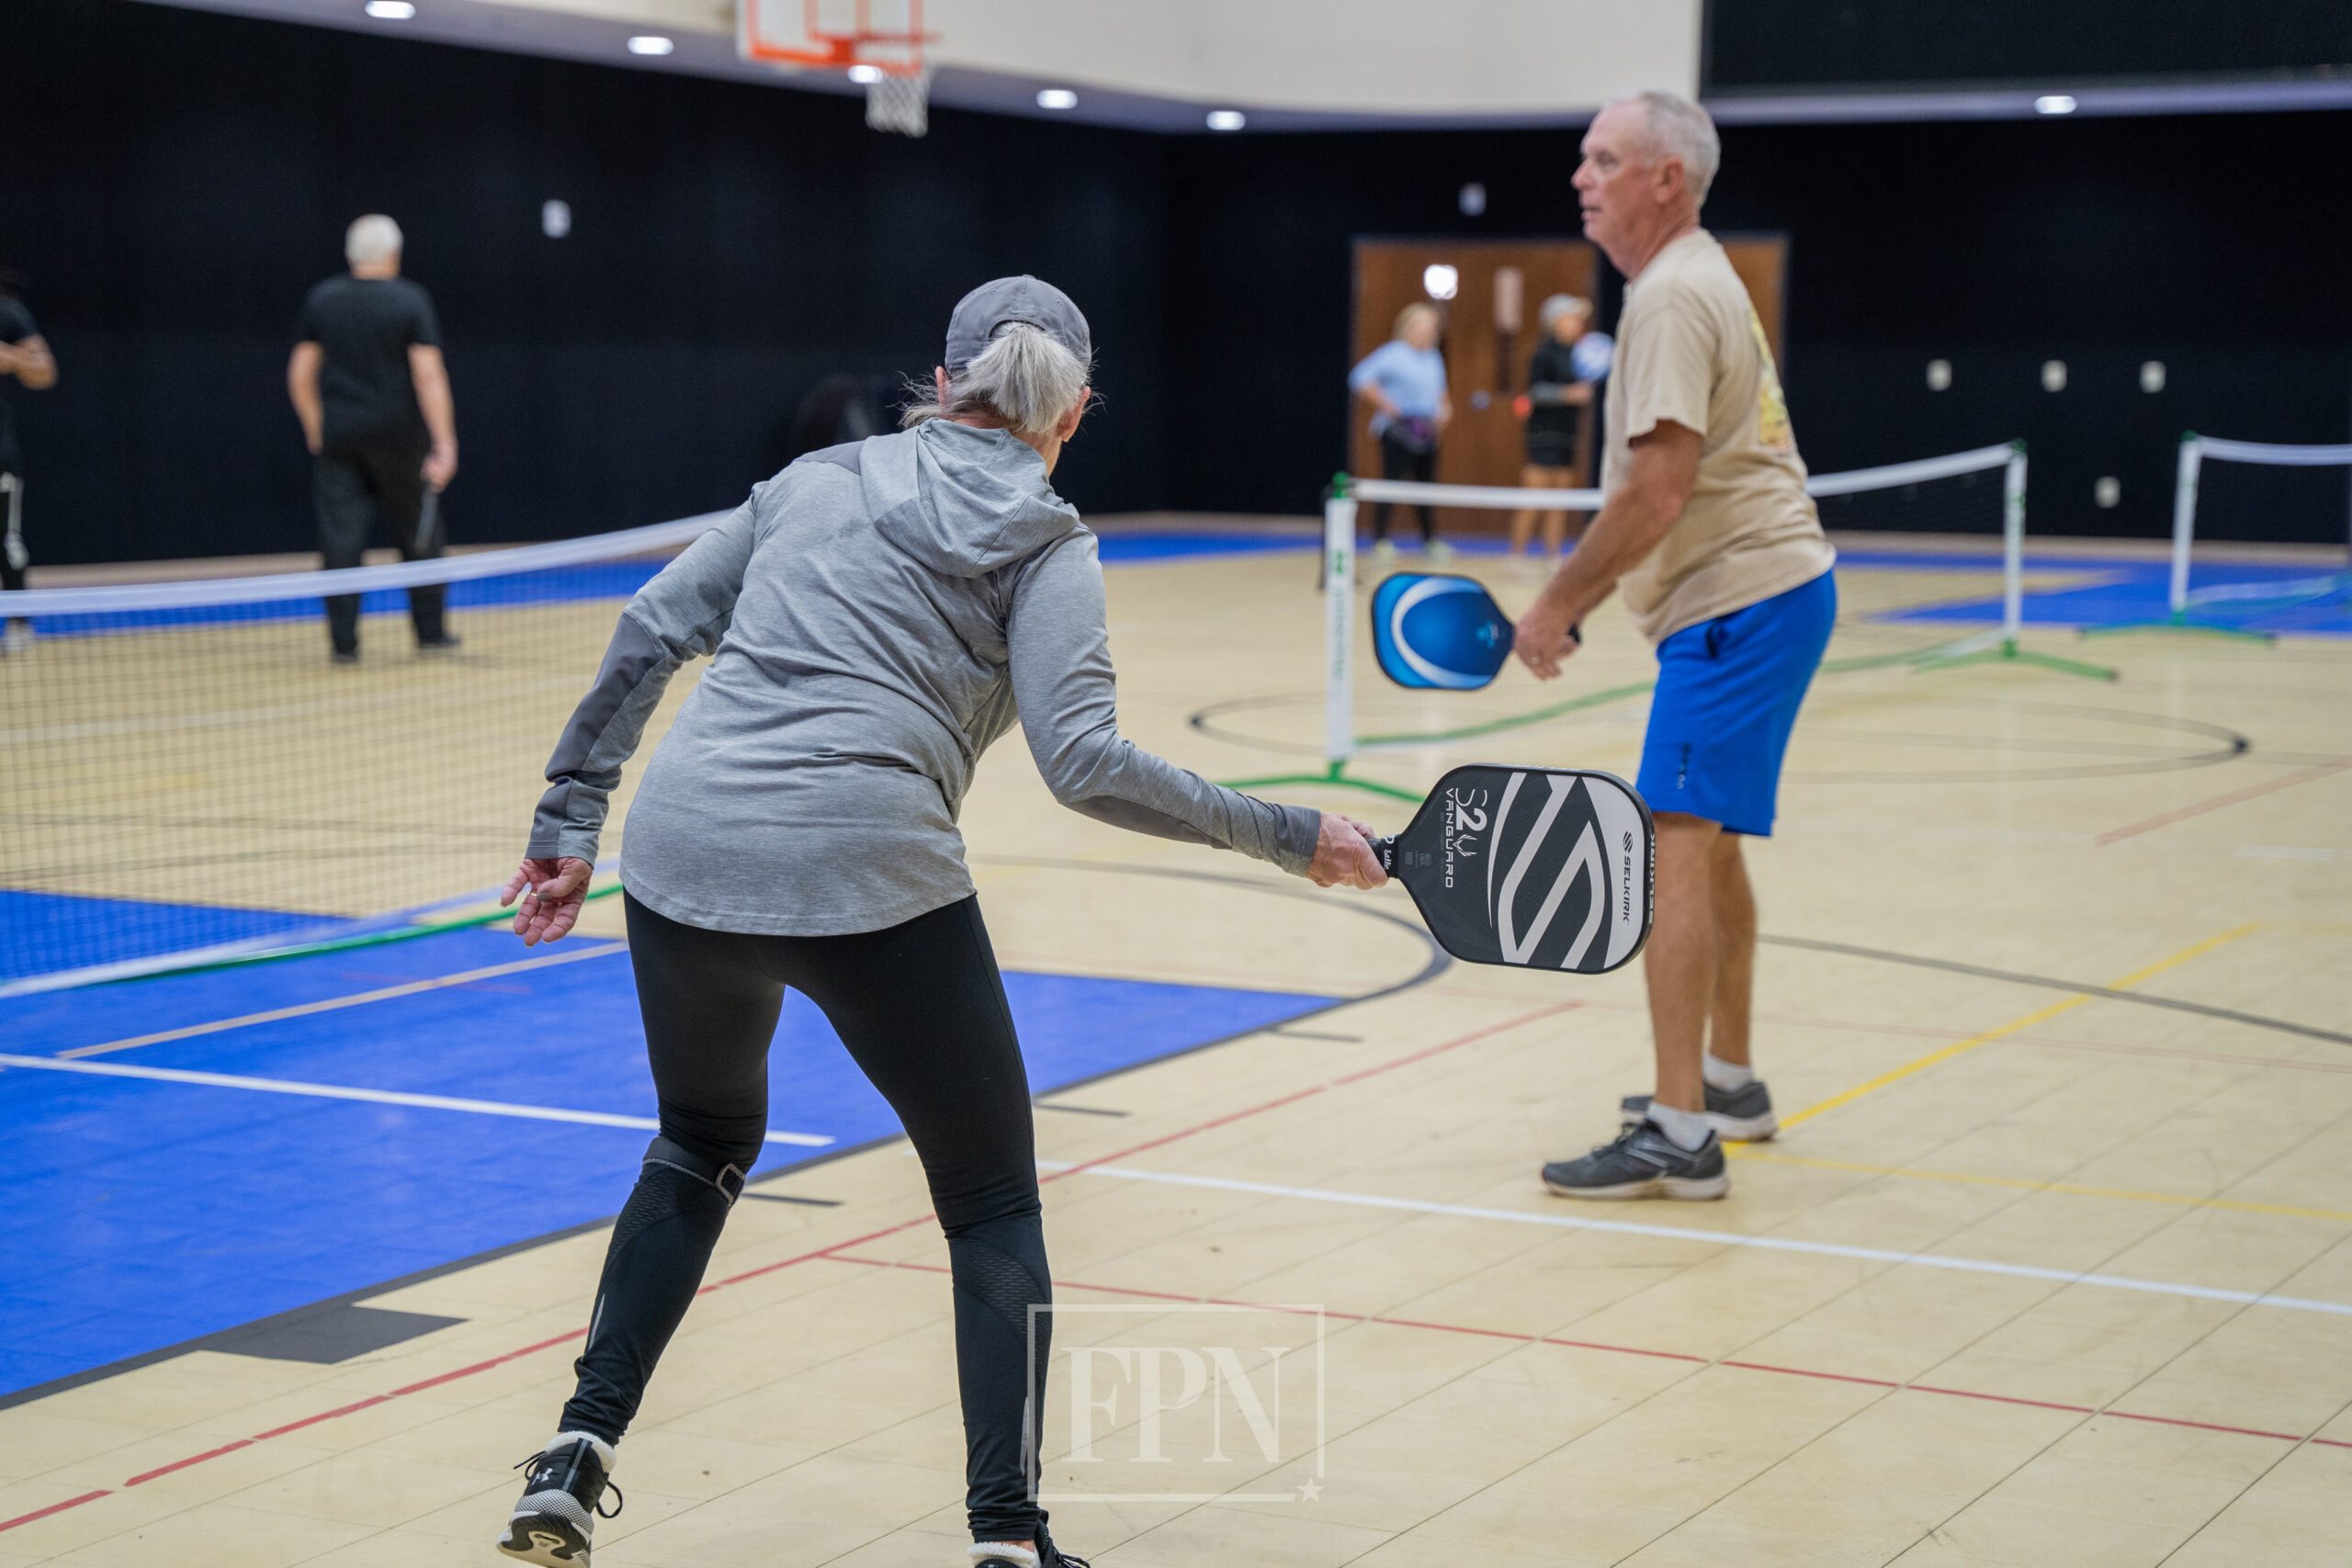 The Pickle Ball Phenomenon By Addison Caddell